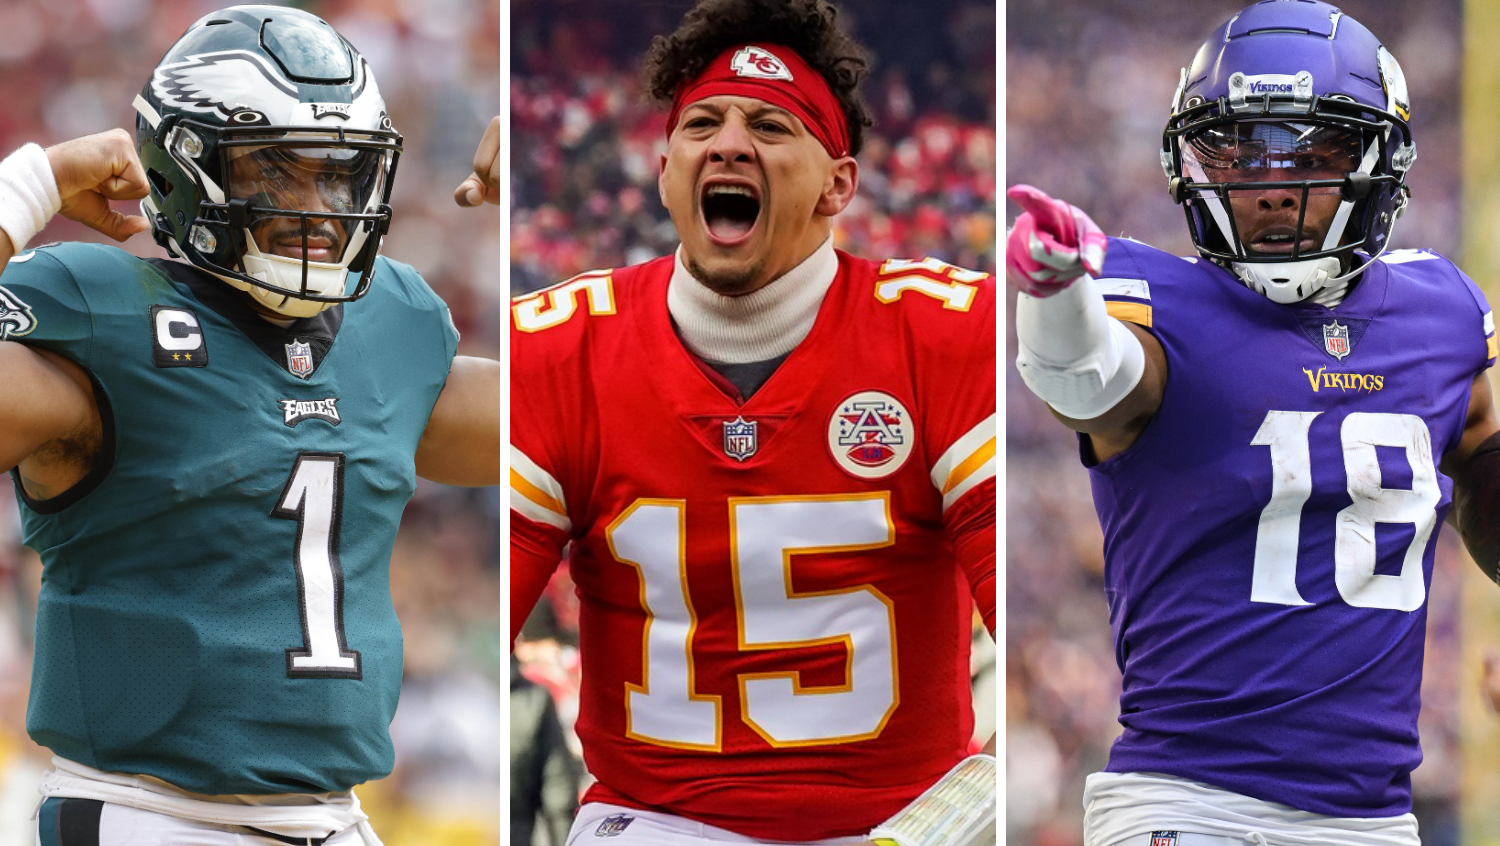 Here are Nos. 1 to 10 on the NFL Top 100 Players list for 2023